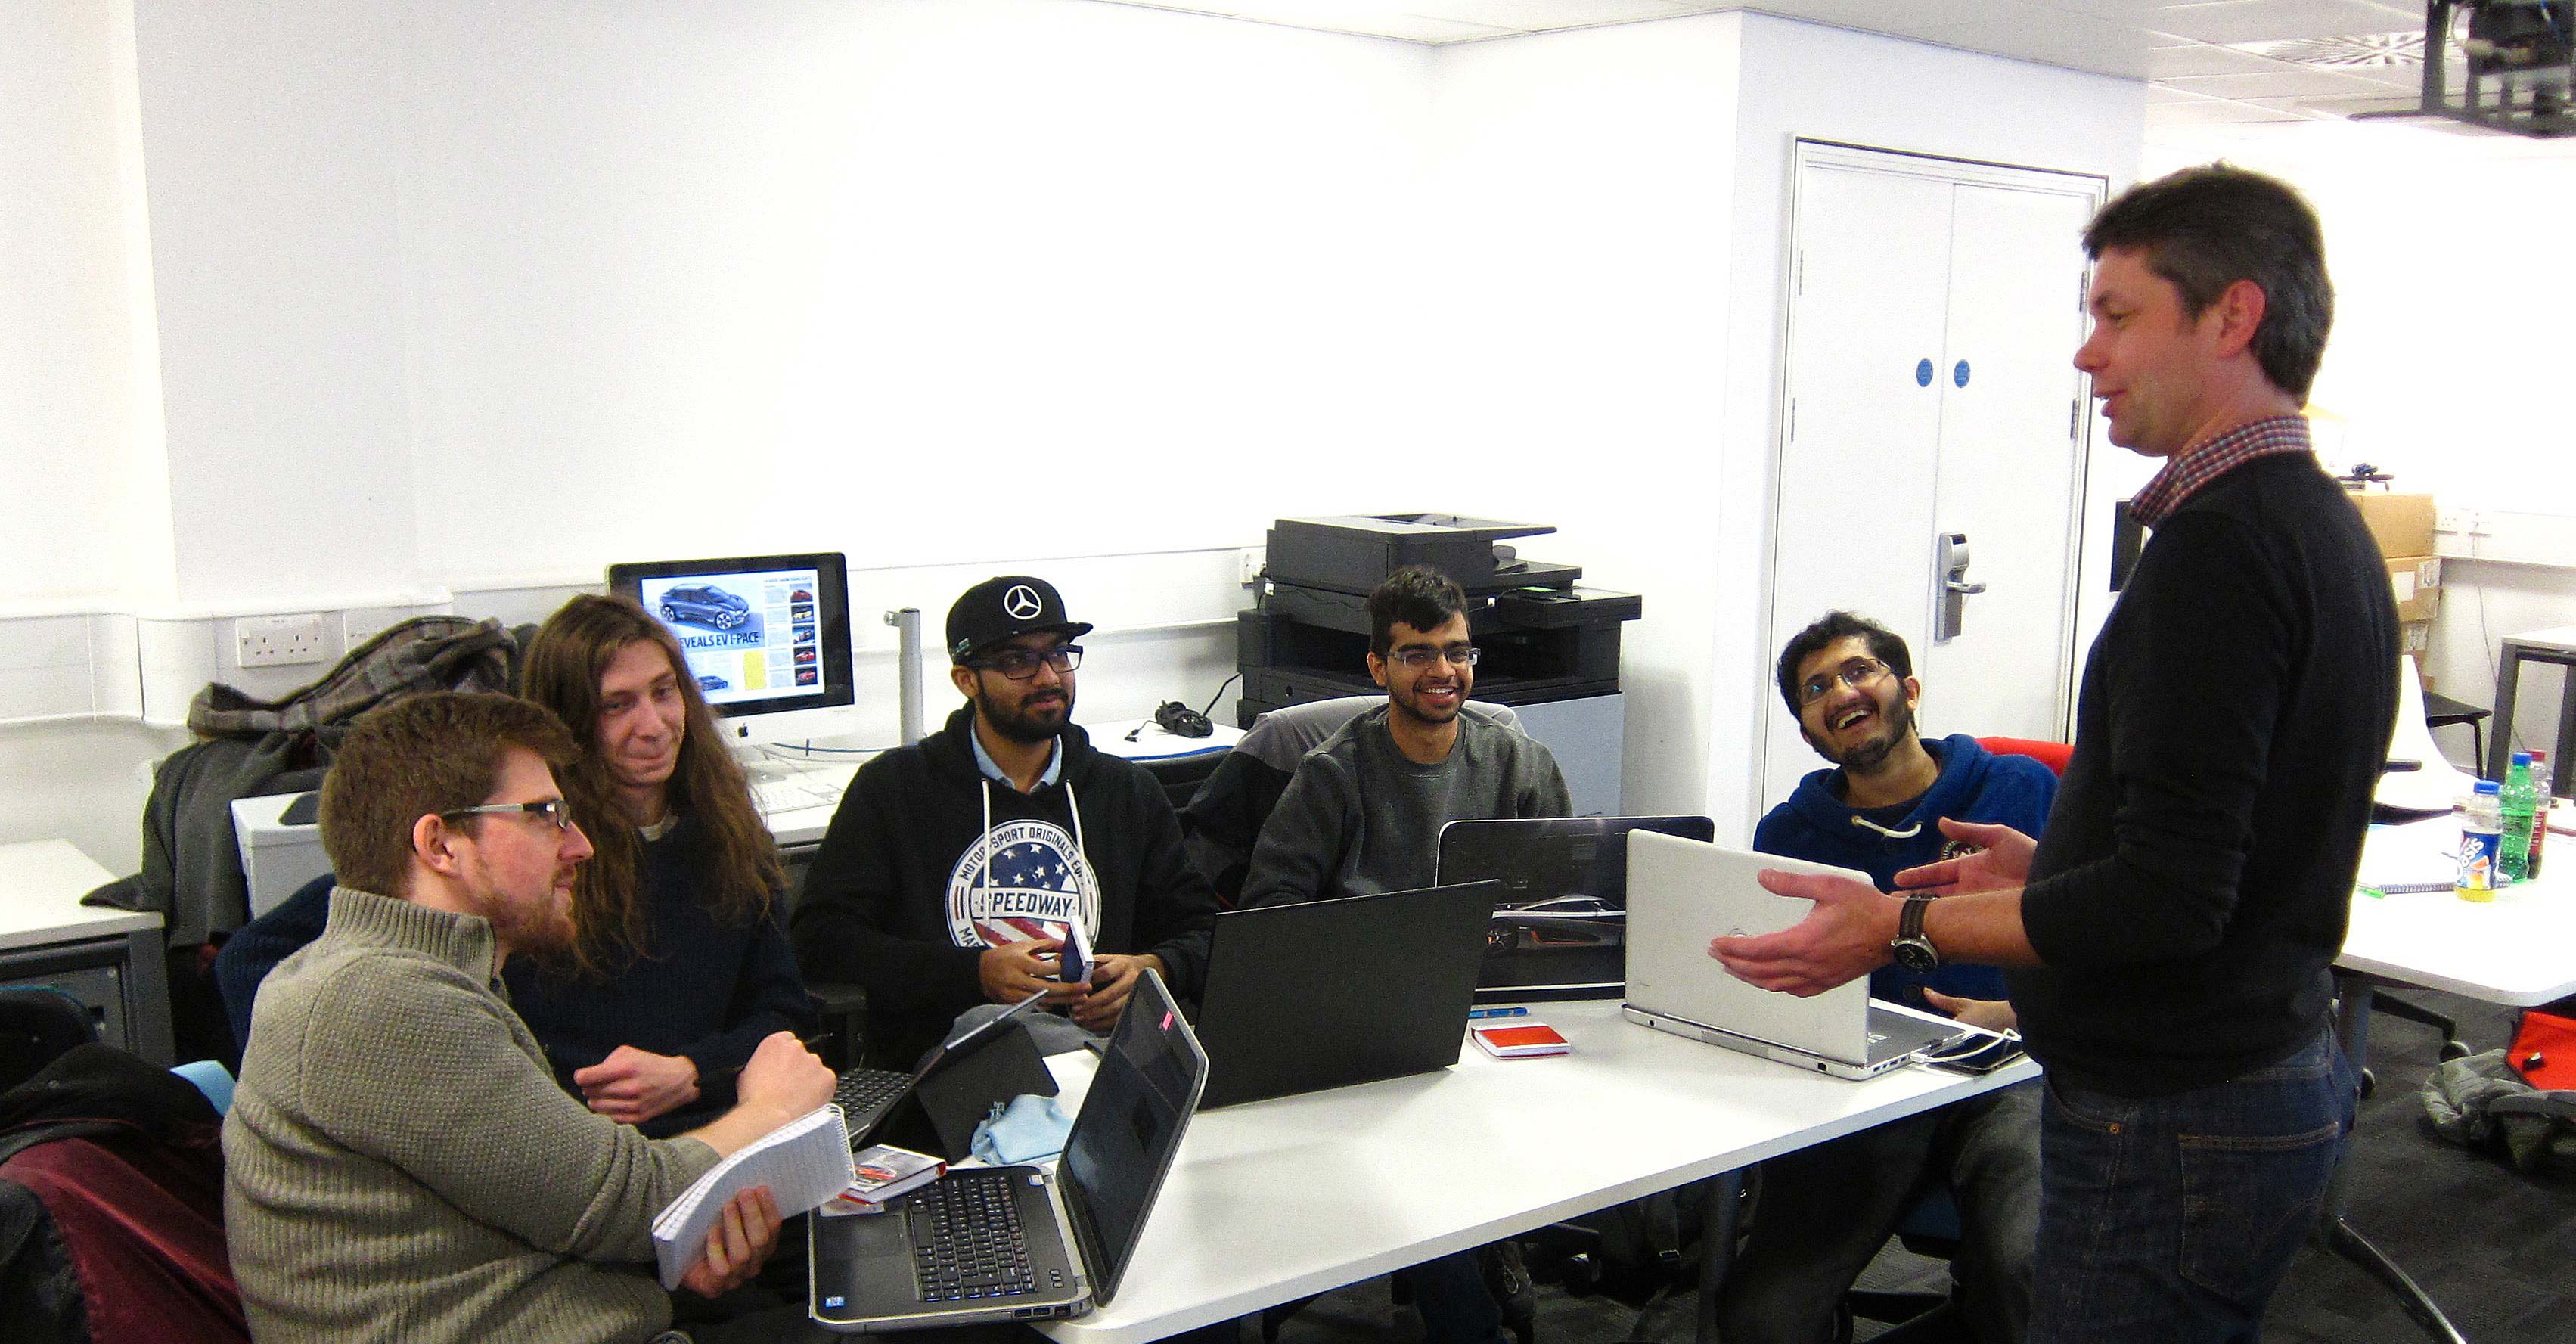 Andrew Noakes and MA Automotive Journalism students at Coventry University